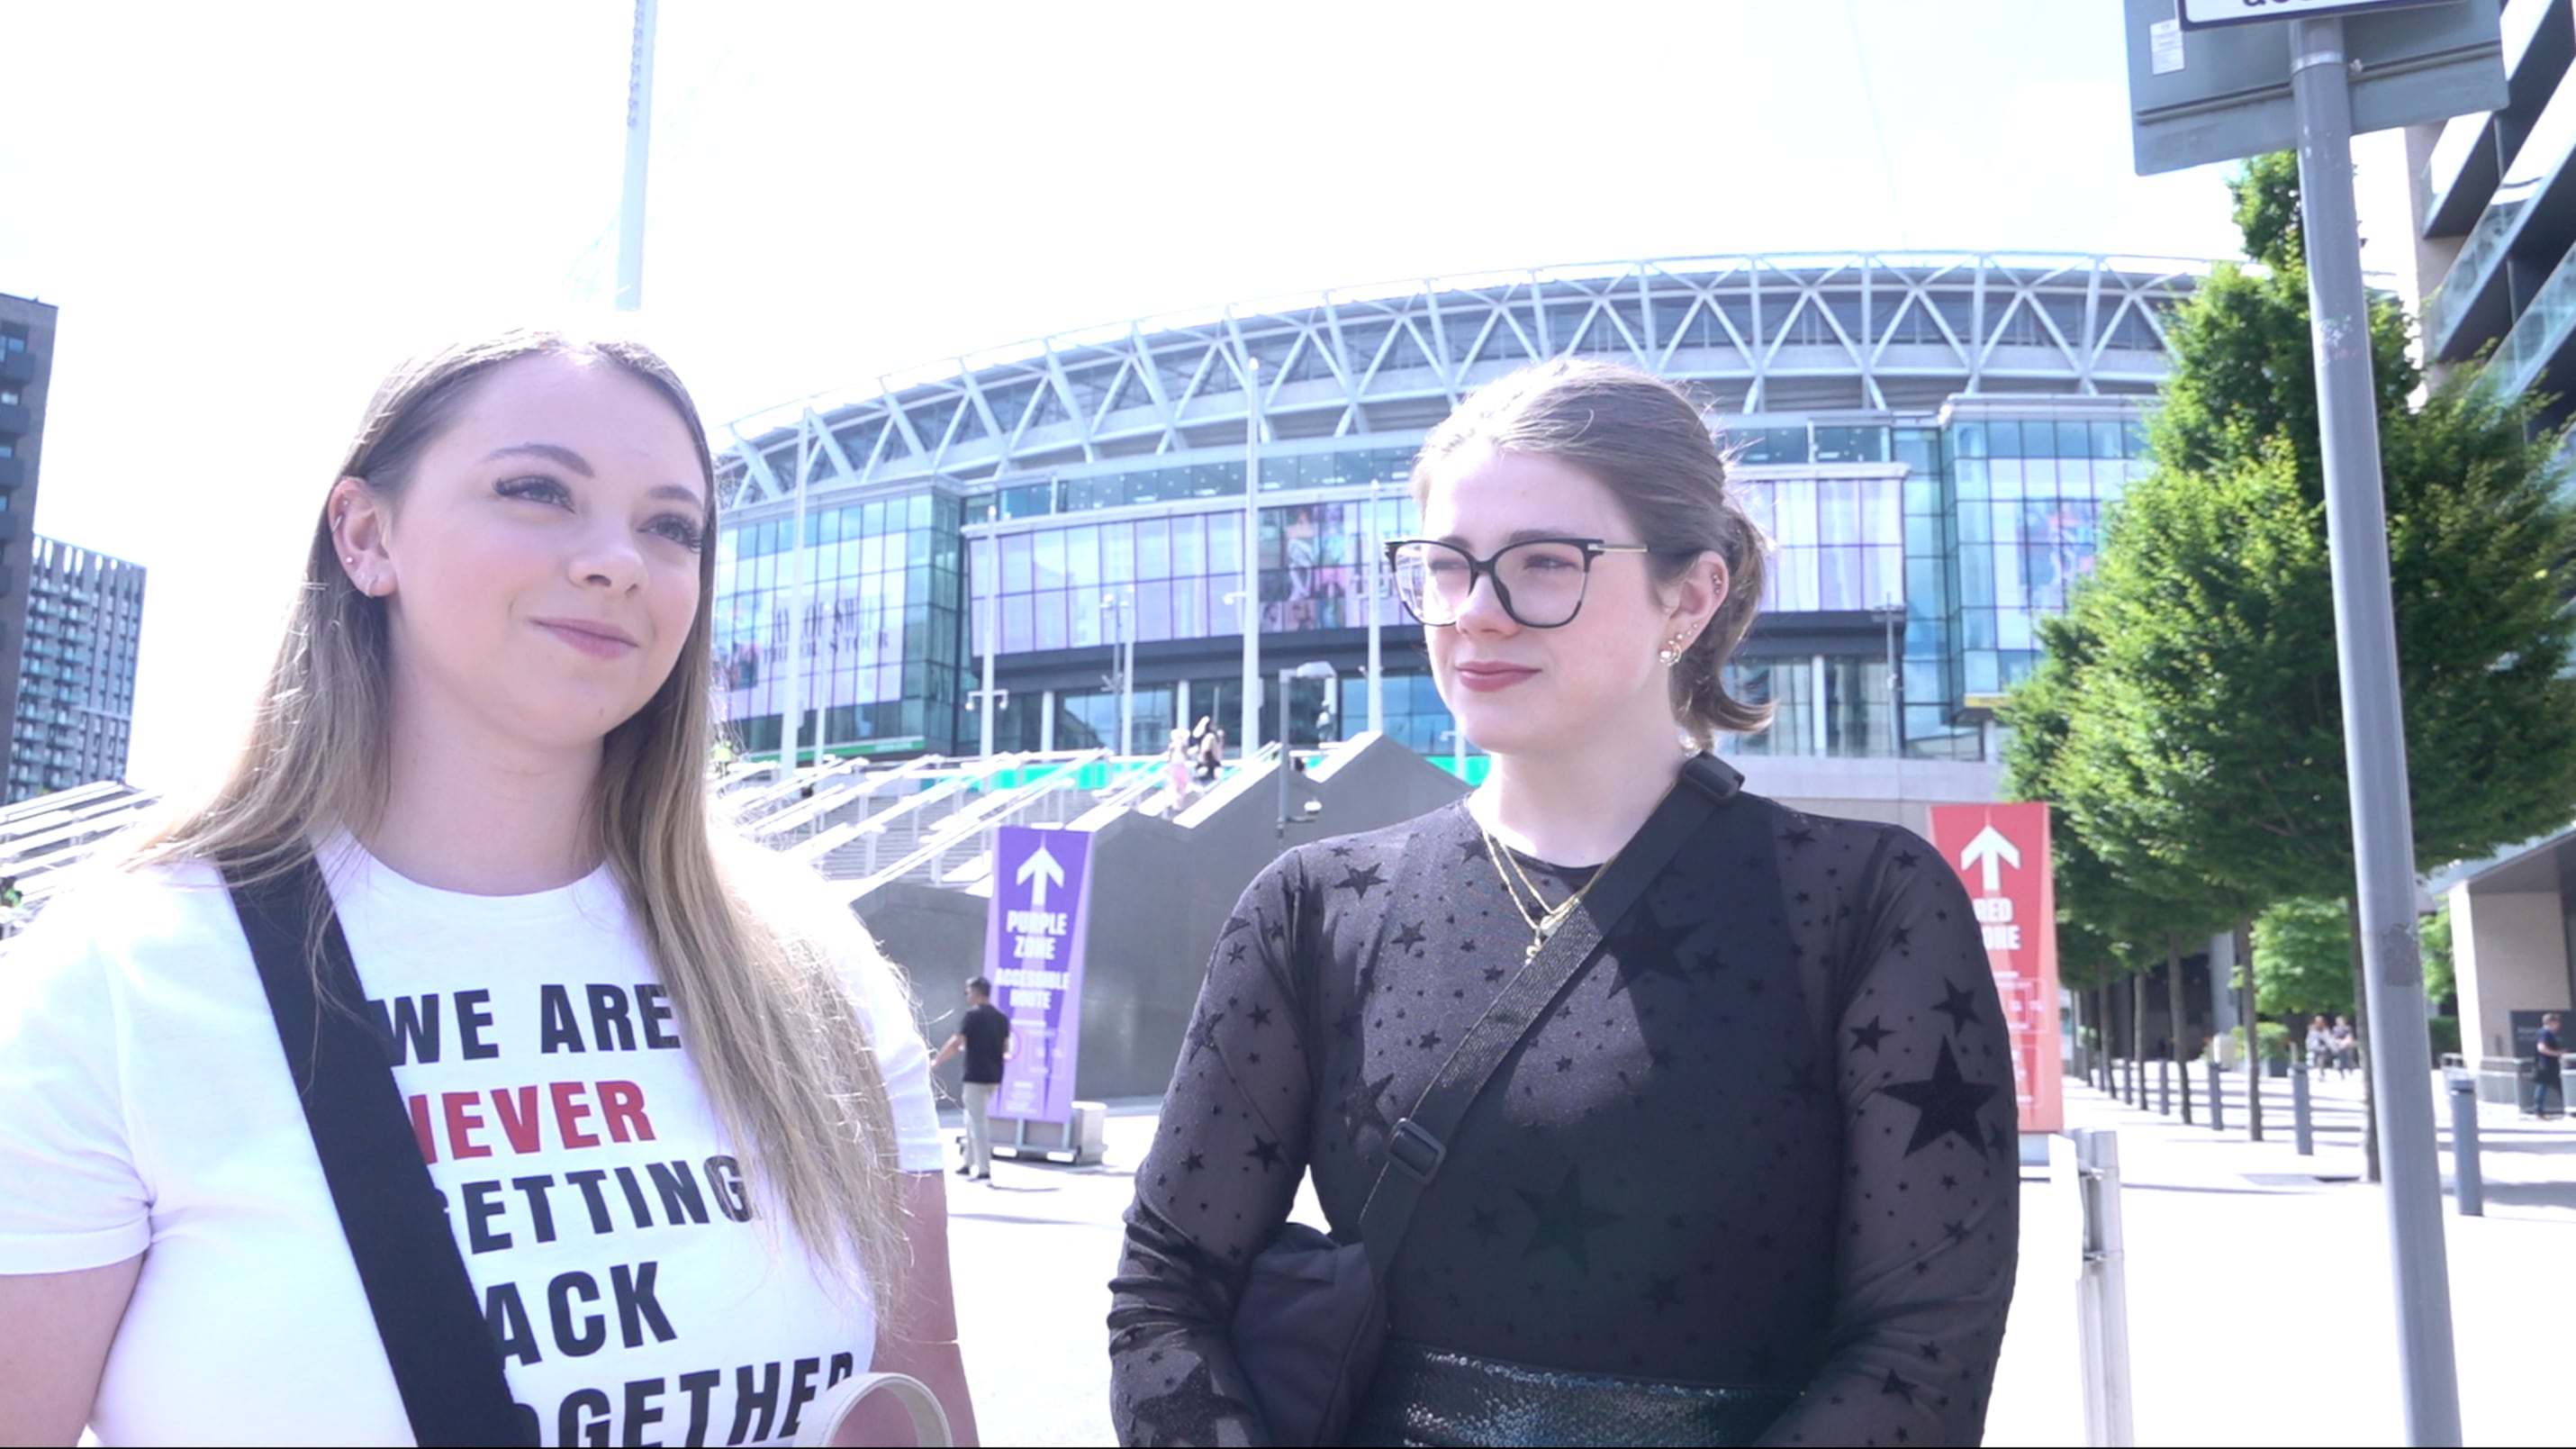 Taylor Swift fans Lauren Robinson, 20, and Grace Arnold, 24, are among those arriving early at Wembley